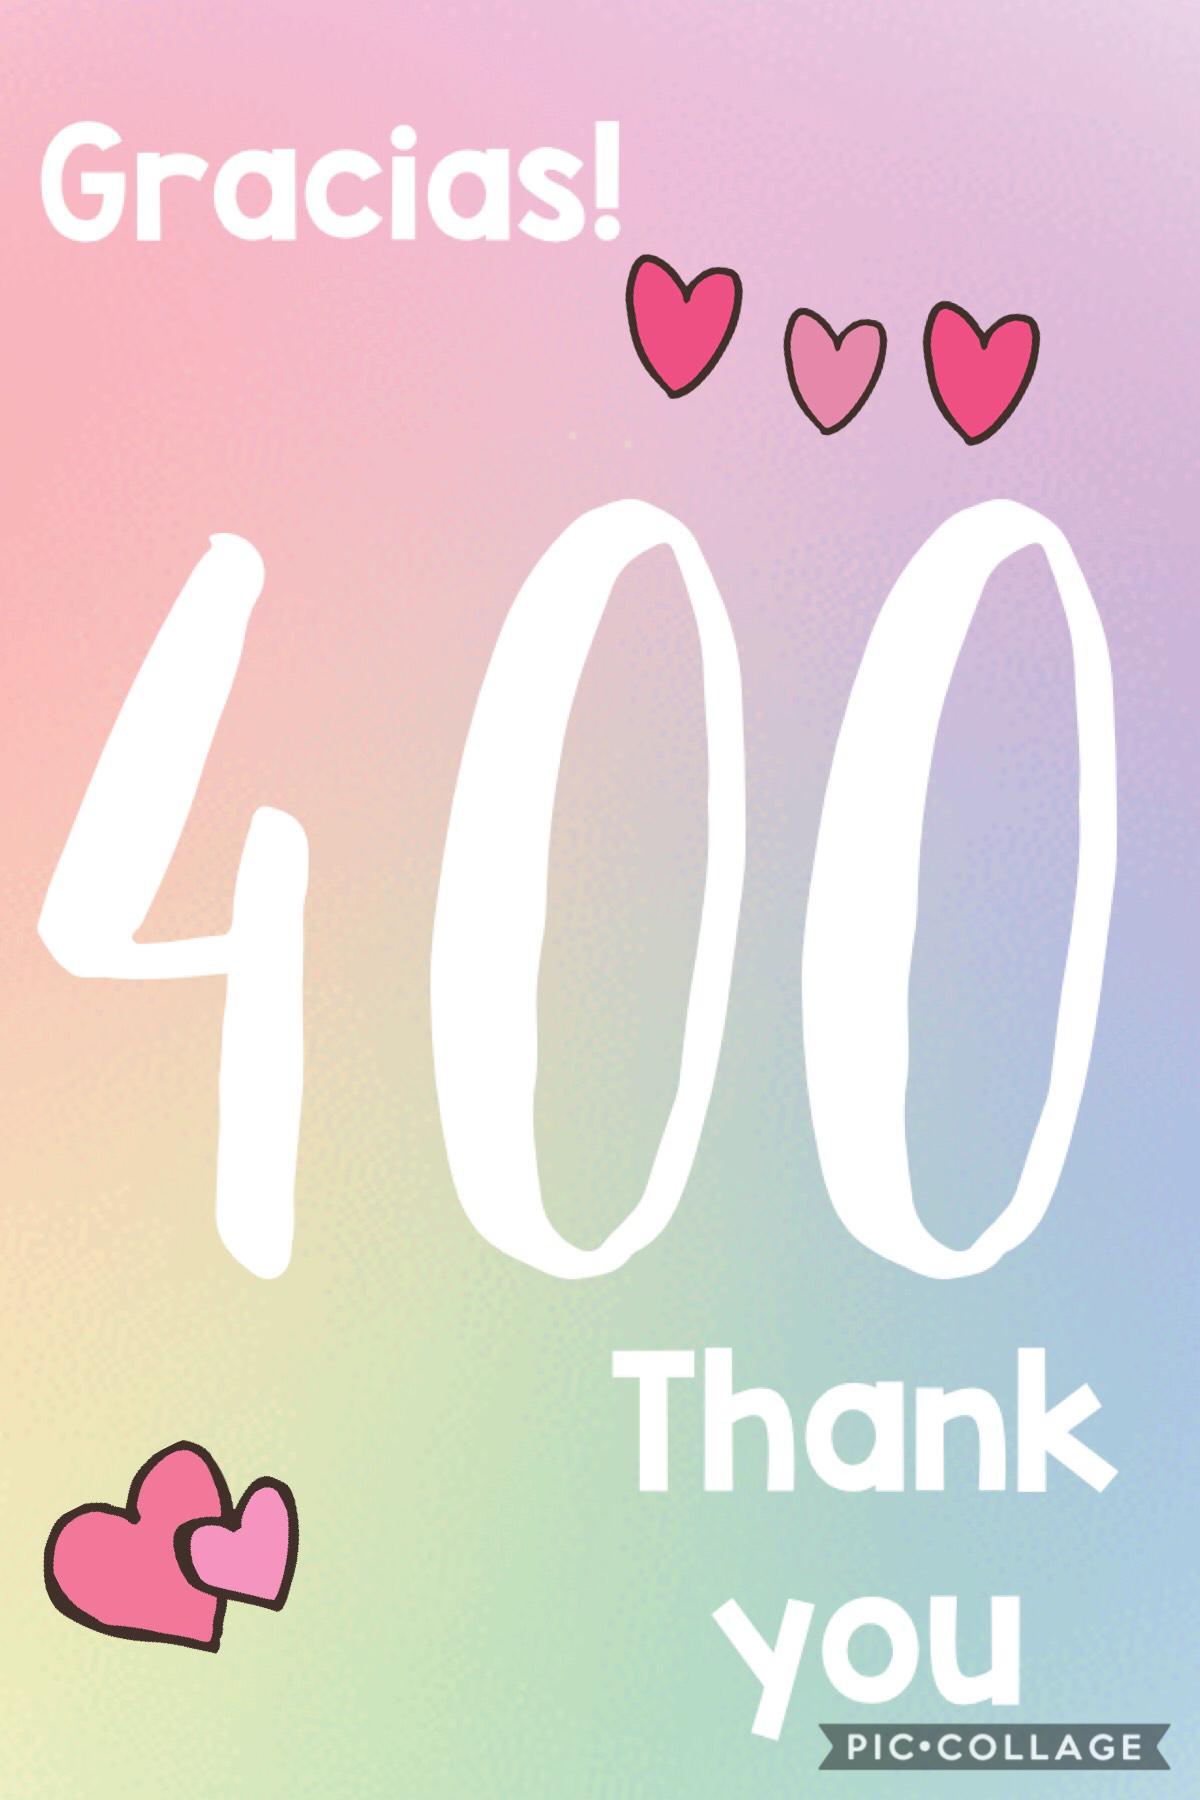 Gracias! 400 followers!
Write in the comments since when you were following me